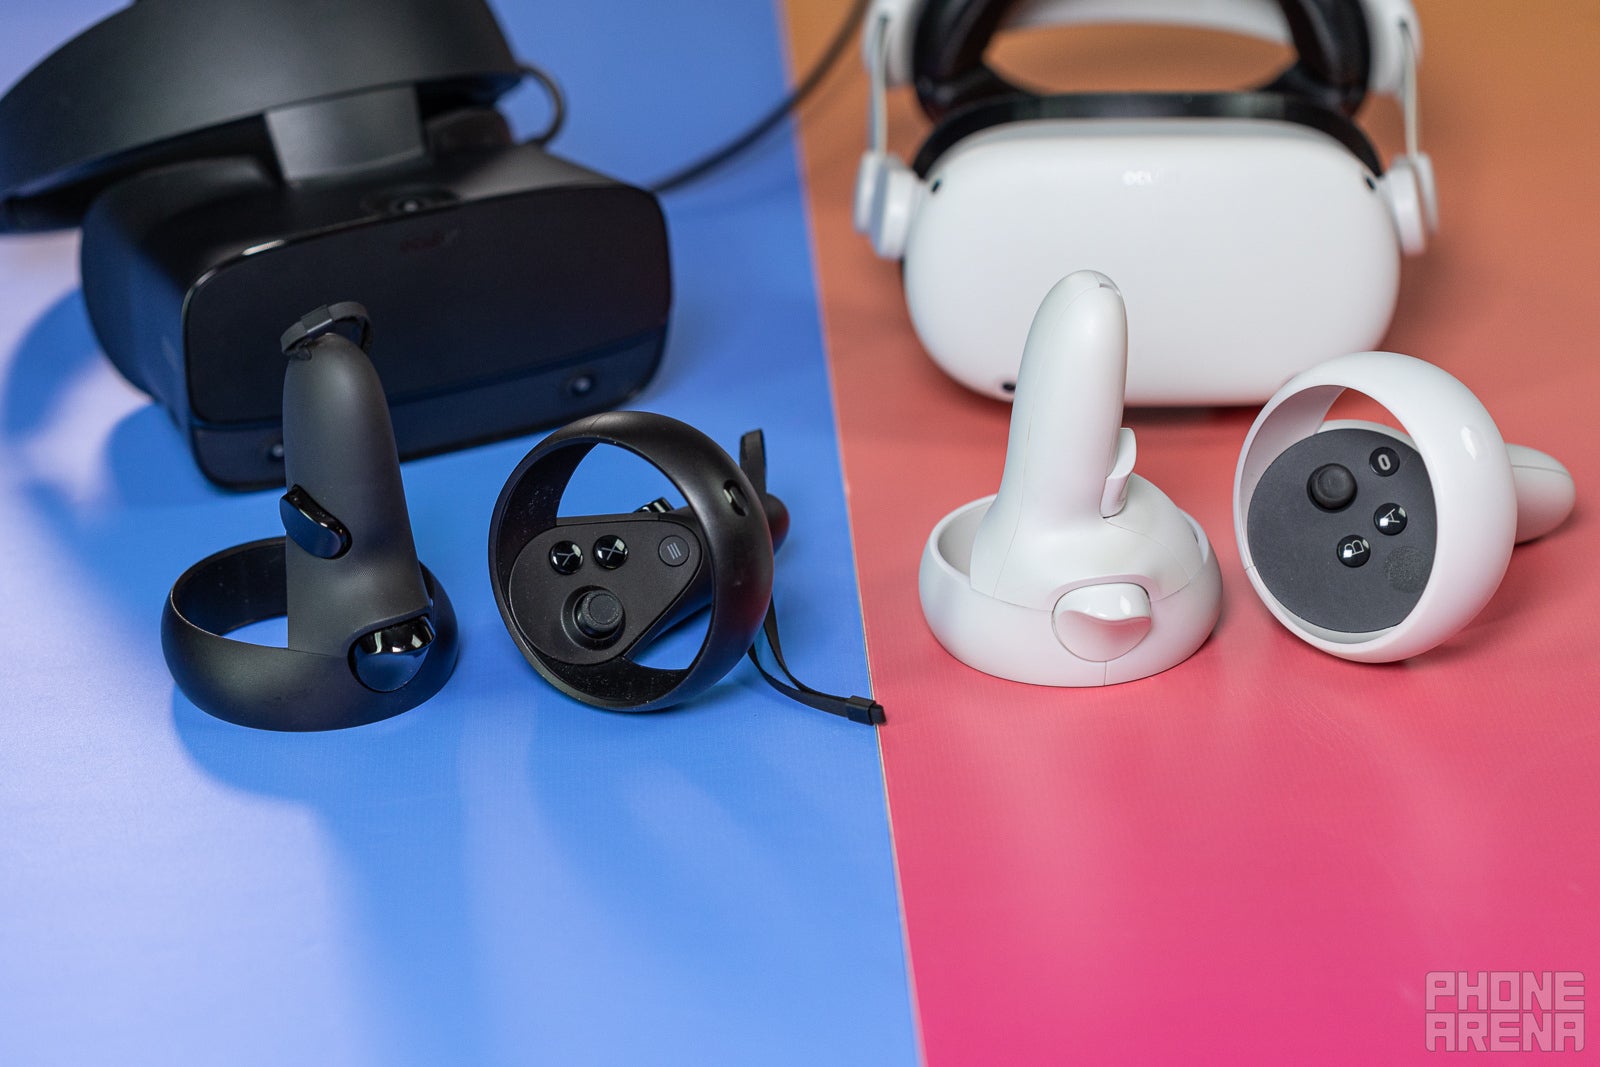 (Image Credit - PhoneArena) The Oculus Rift S (left) and Meta Quest 2 (right) - Meta Quest 2 vs Oculus Rift S: Which one should you buy? The standalone VR headset or the PCVR-only